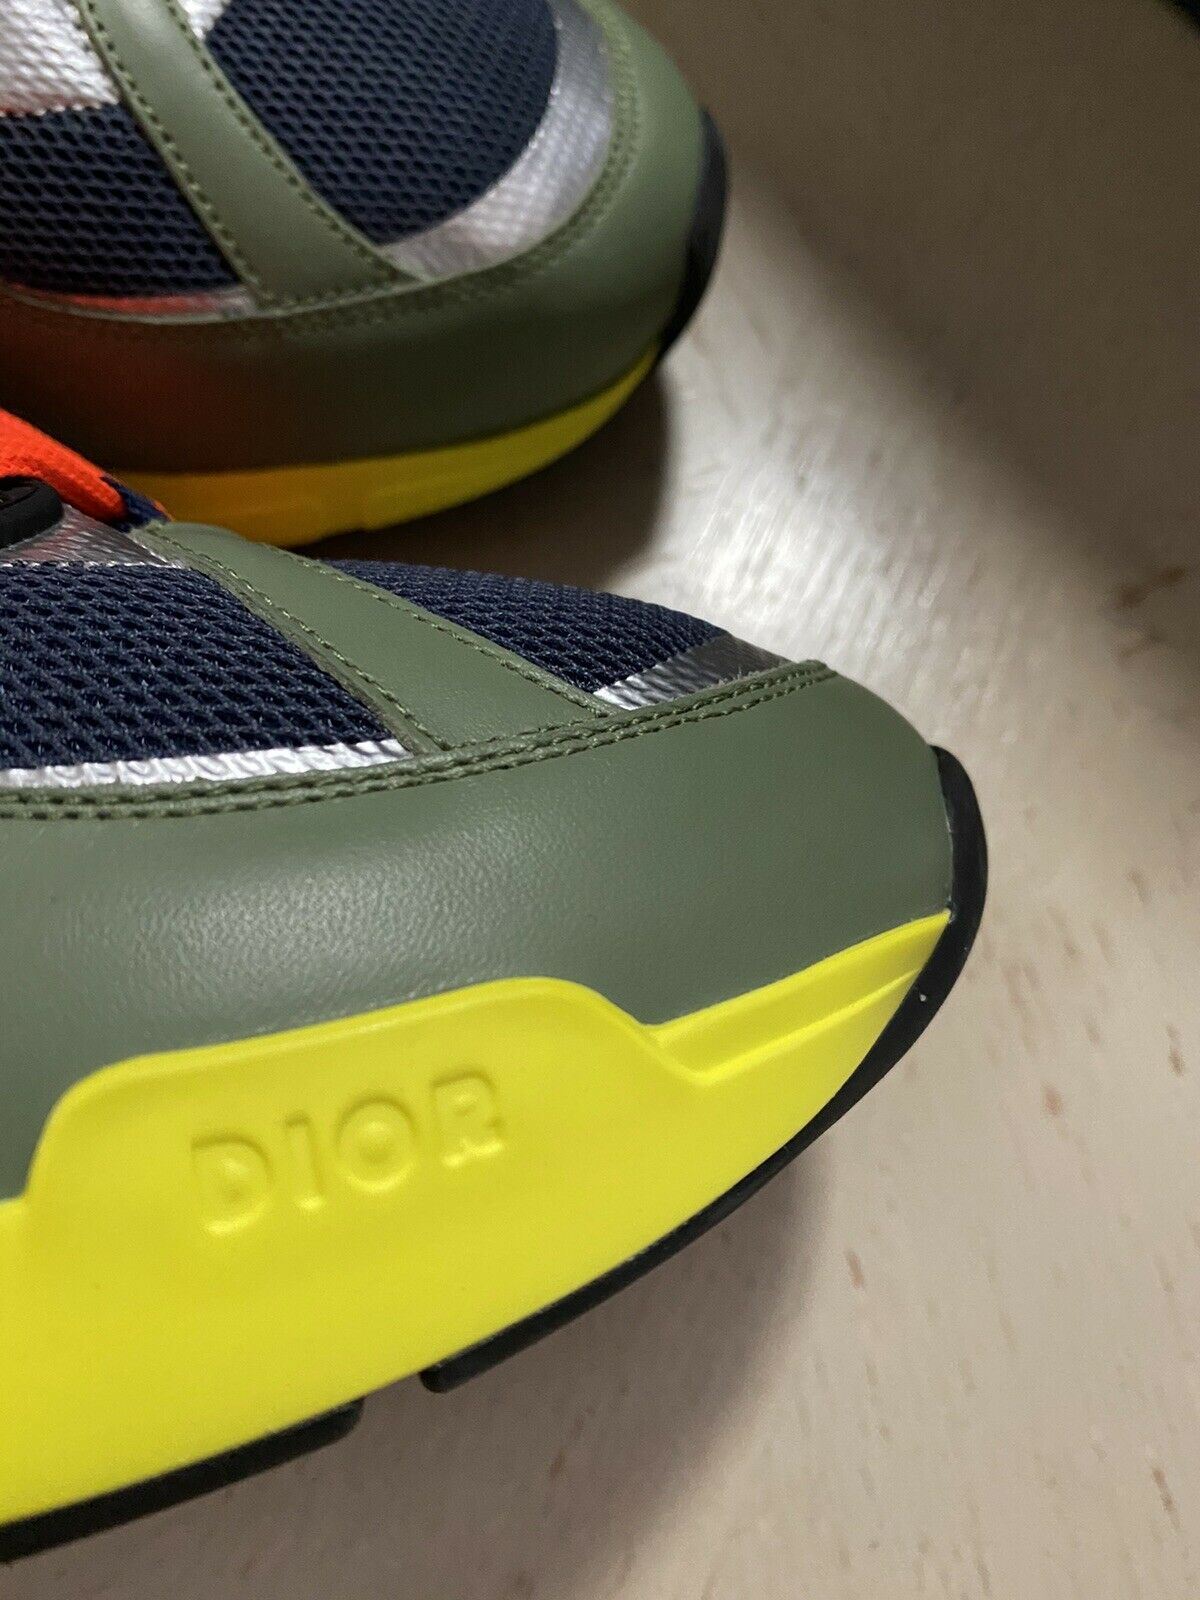 New $1050 Dior B24 Men’s Sneakers Shoes Green/Yellow 7 US/40 Eu Italy